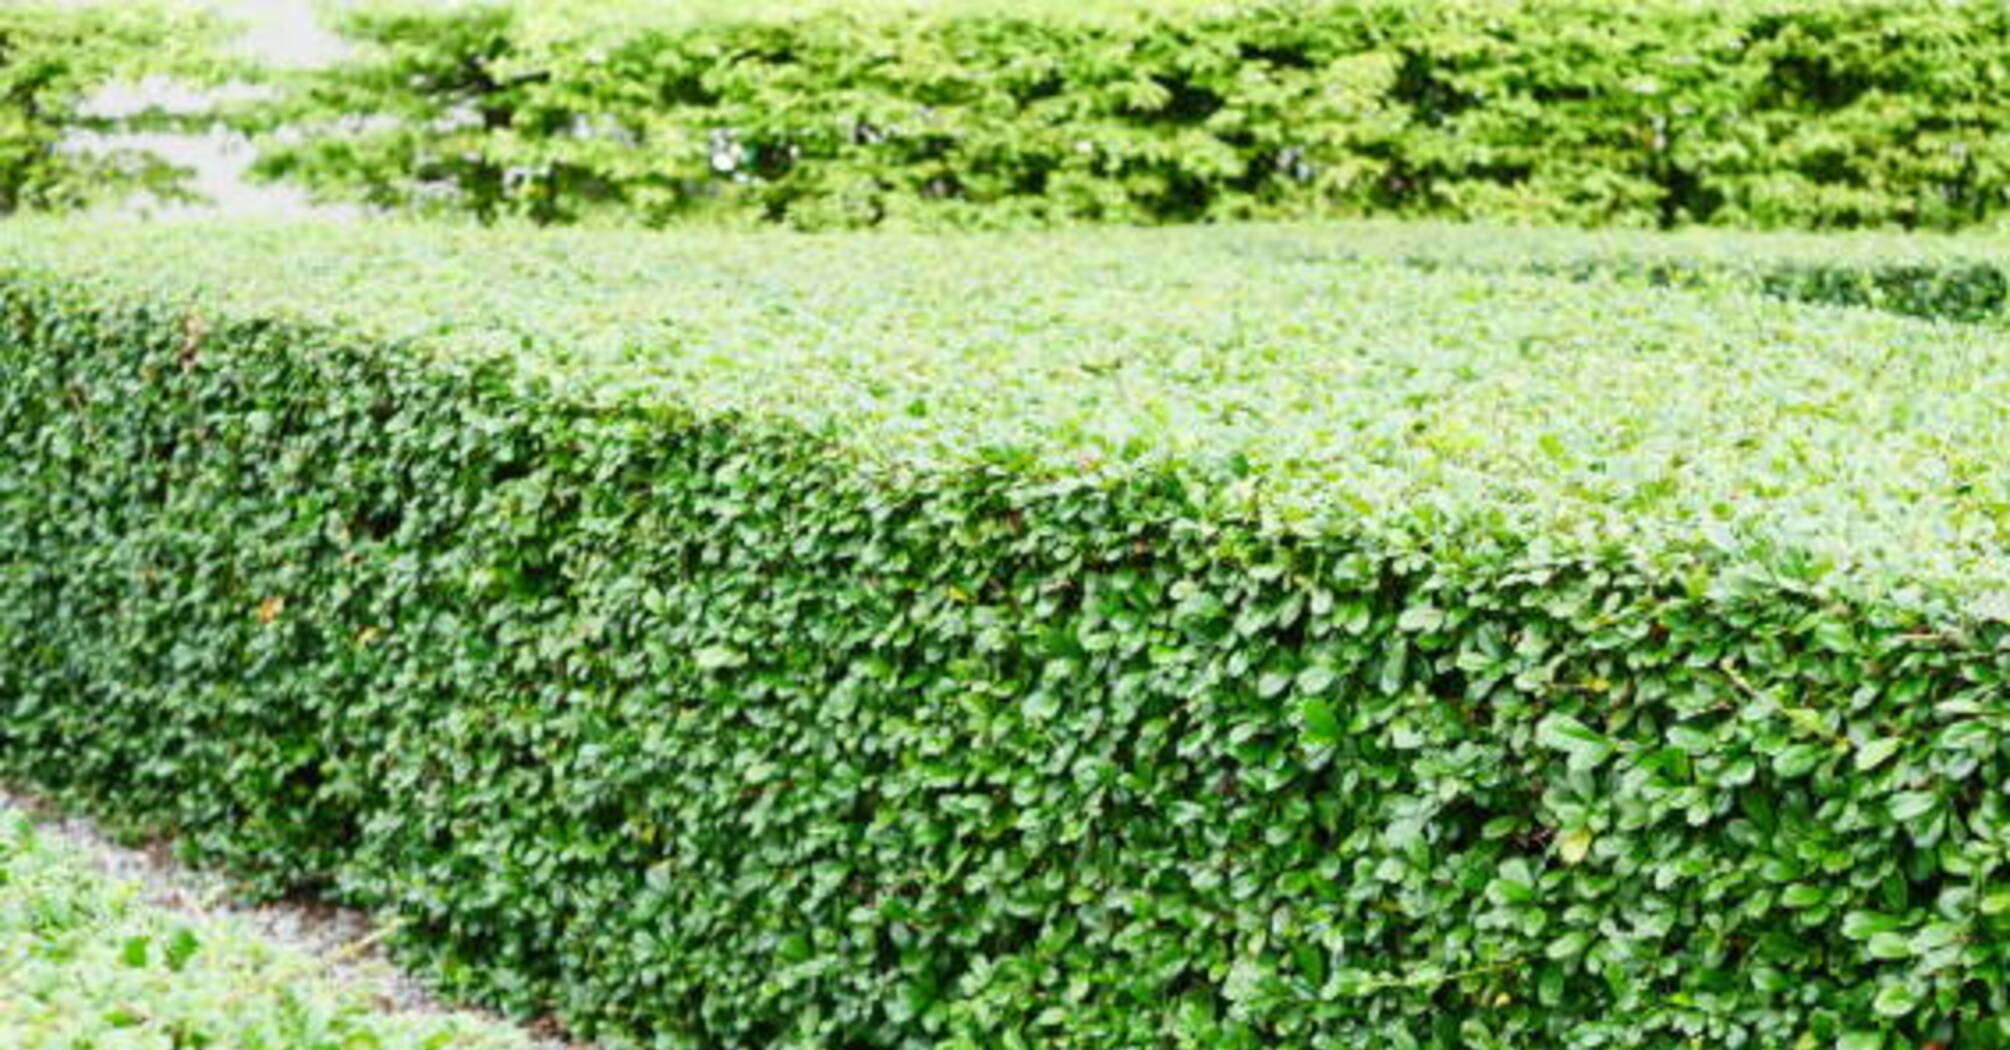 Is it worth installing a plant fence? Advantages and disadvantages worth knowing